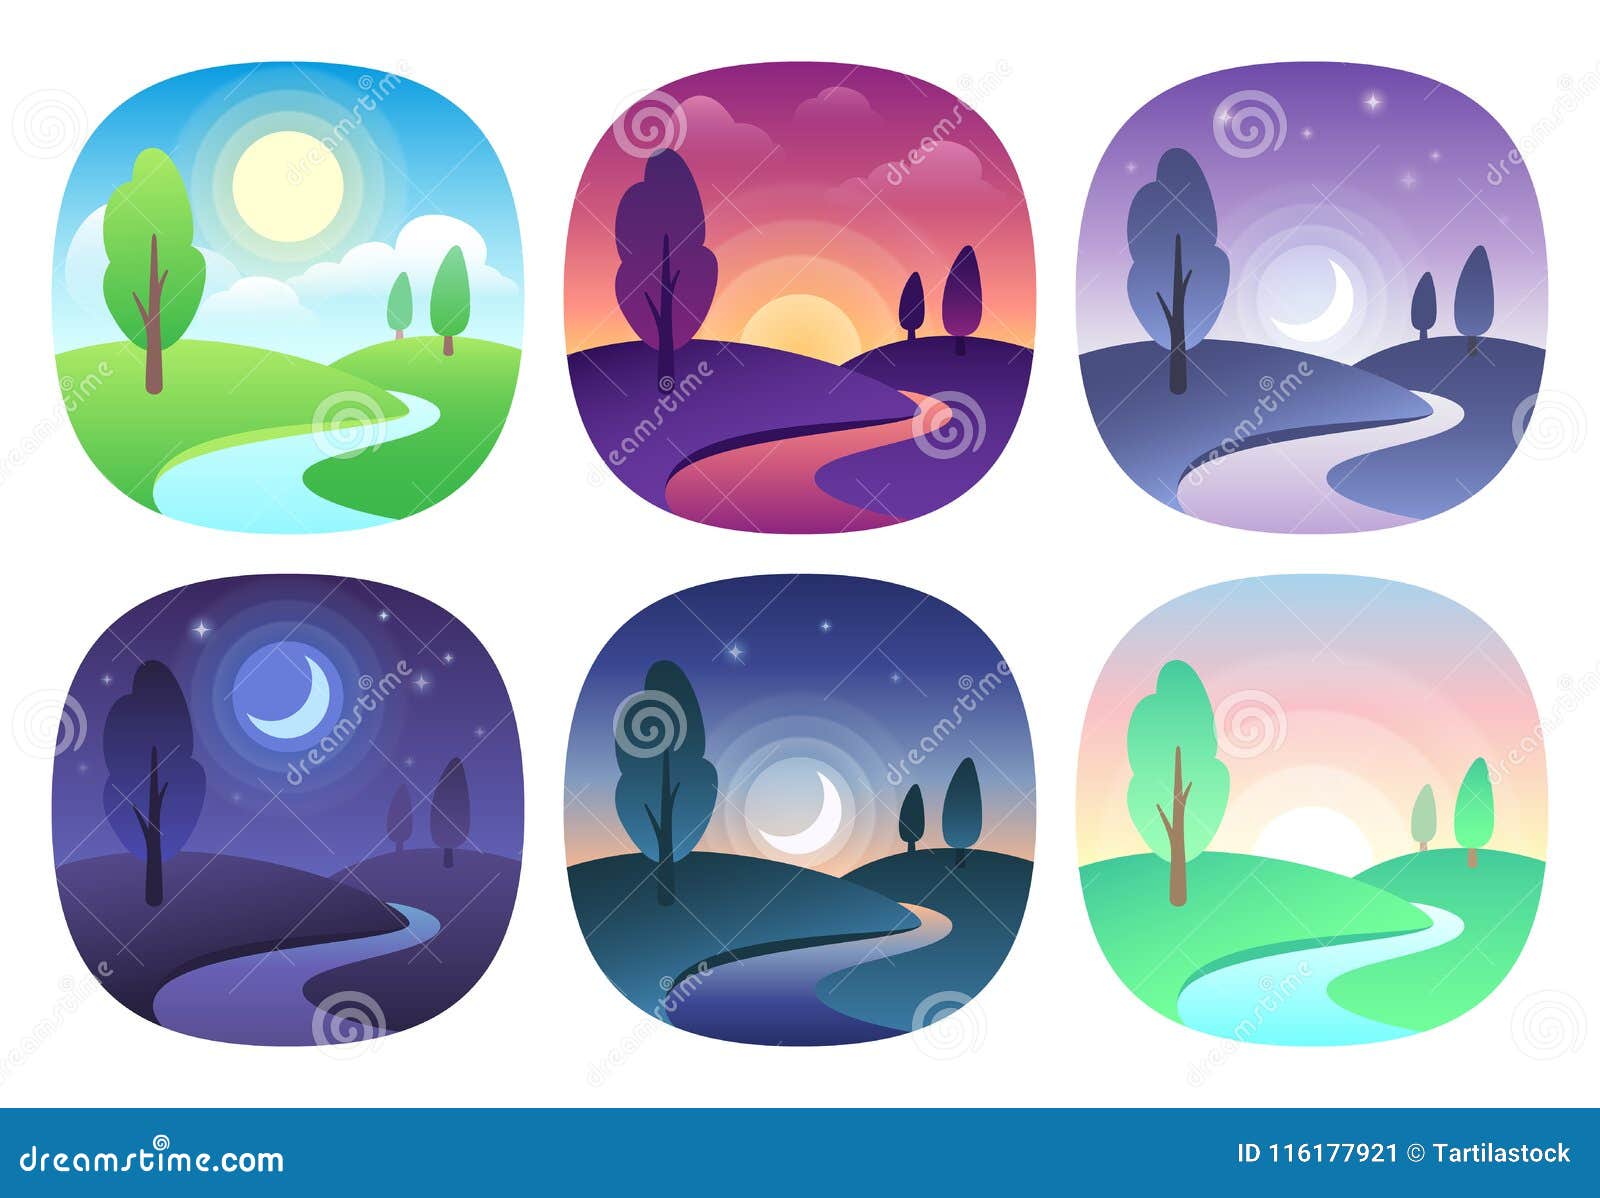 modern beautiful landscape with gradients. sunrise, dawn, morning, day, noon, sunset, dusk and night icon. sun time